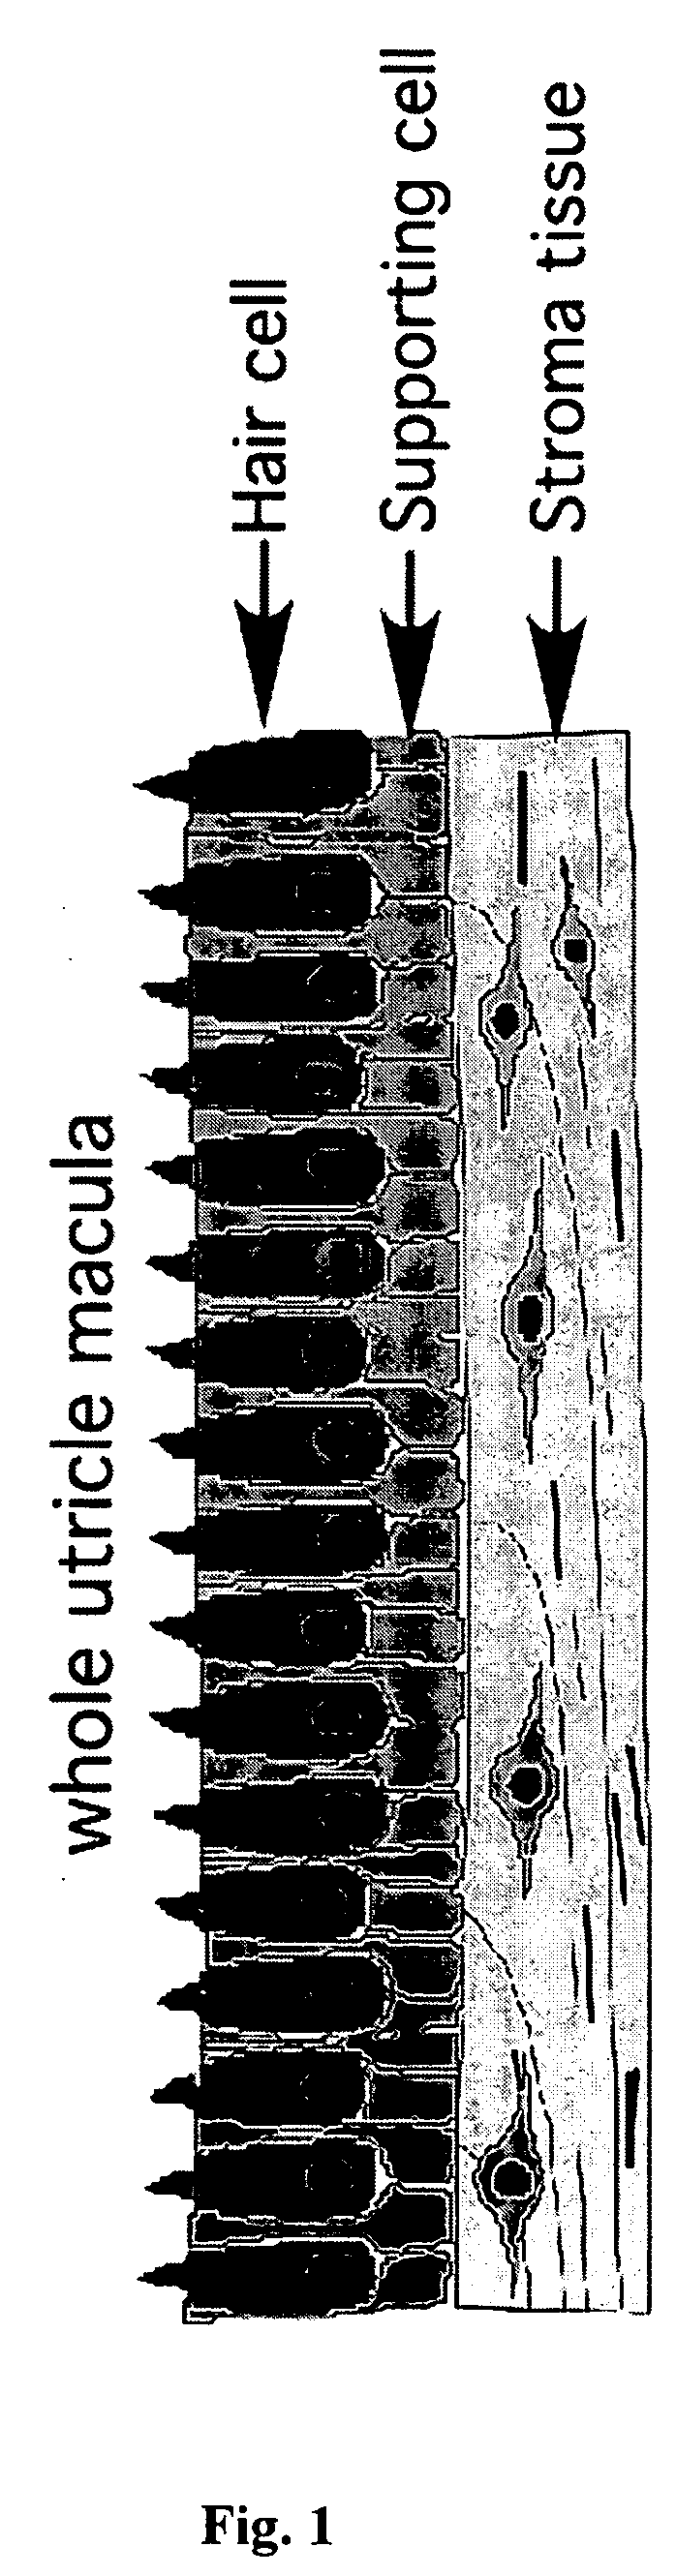 Methods and products related to the production of inner ear hair cells